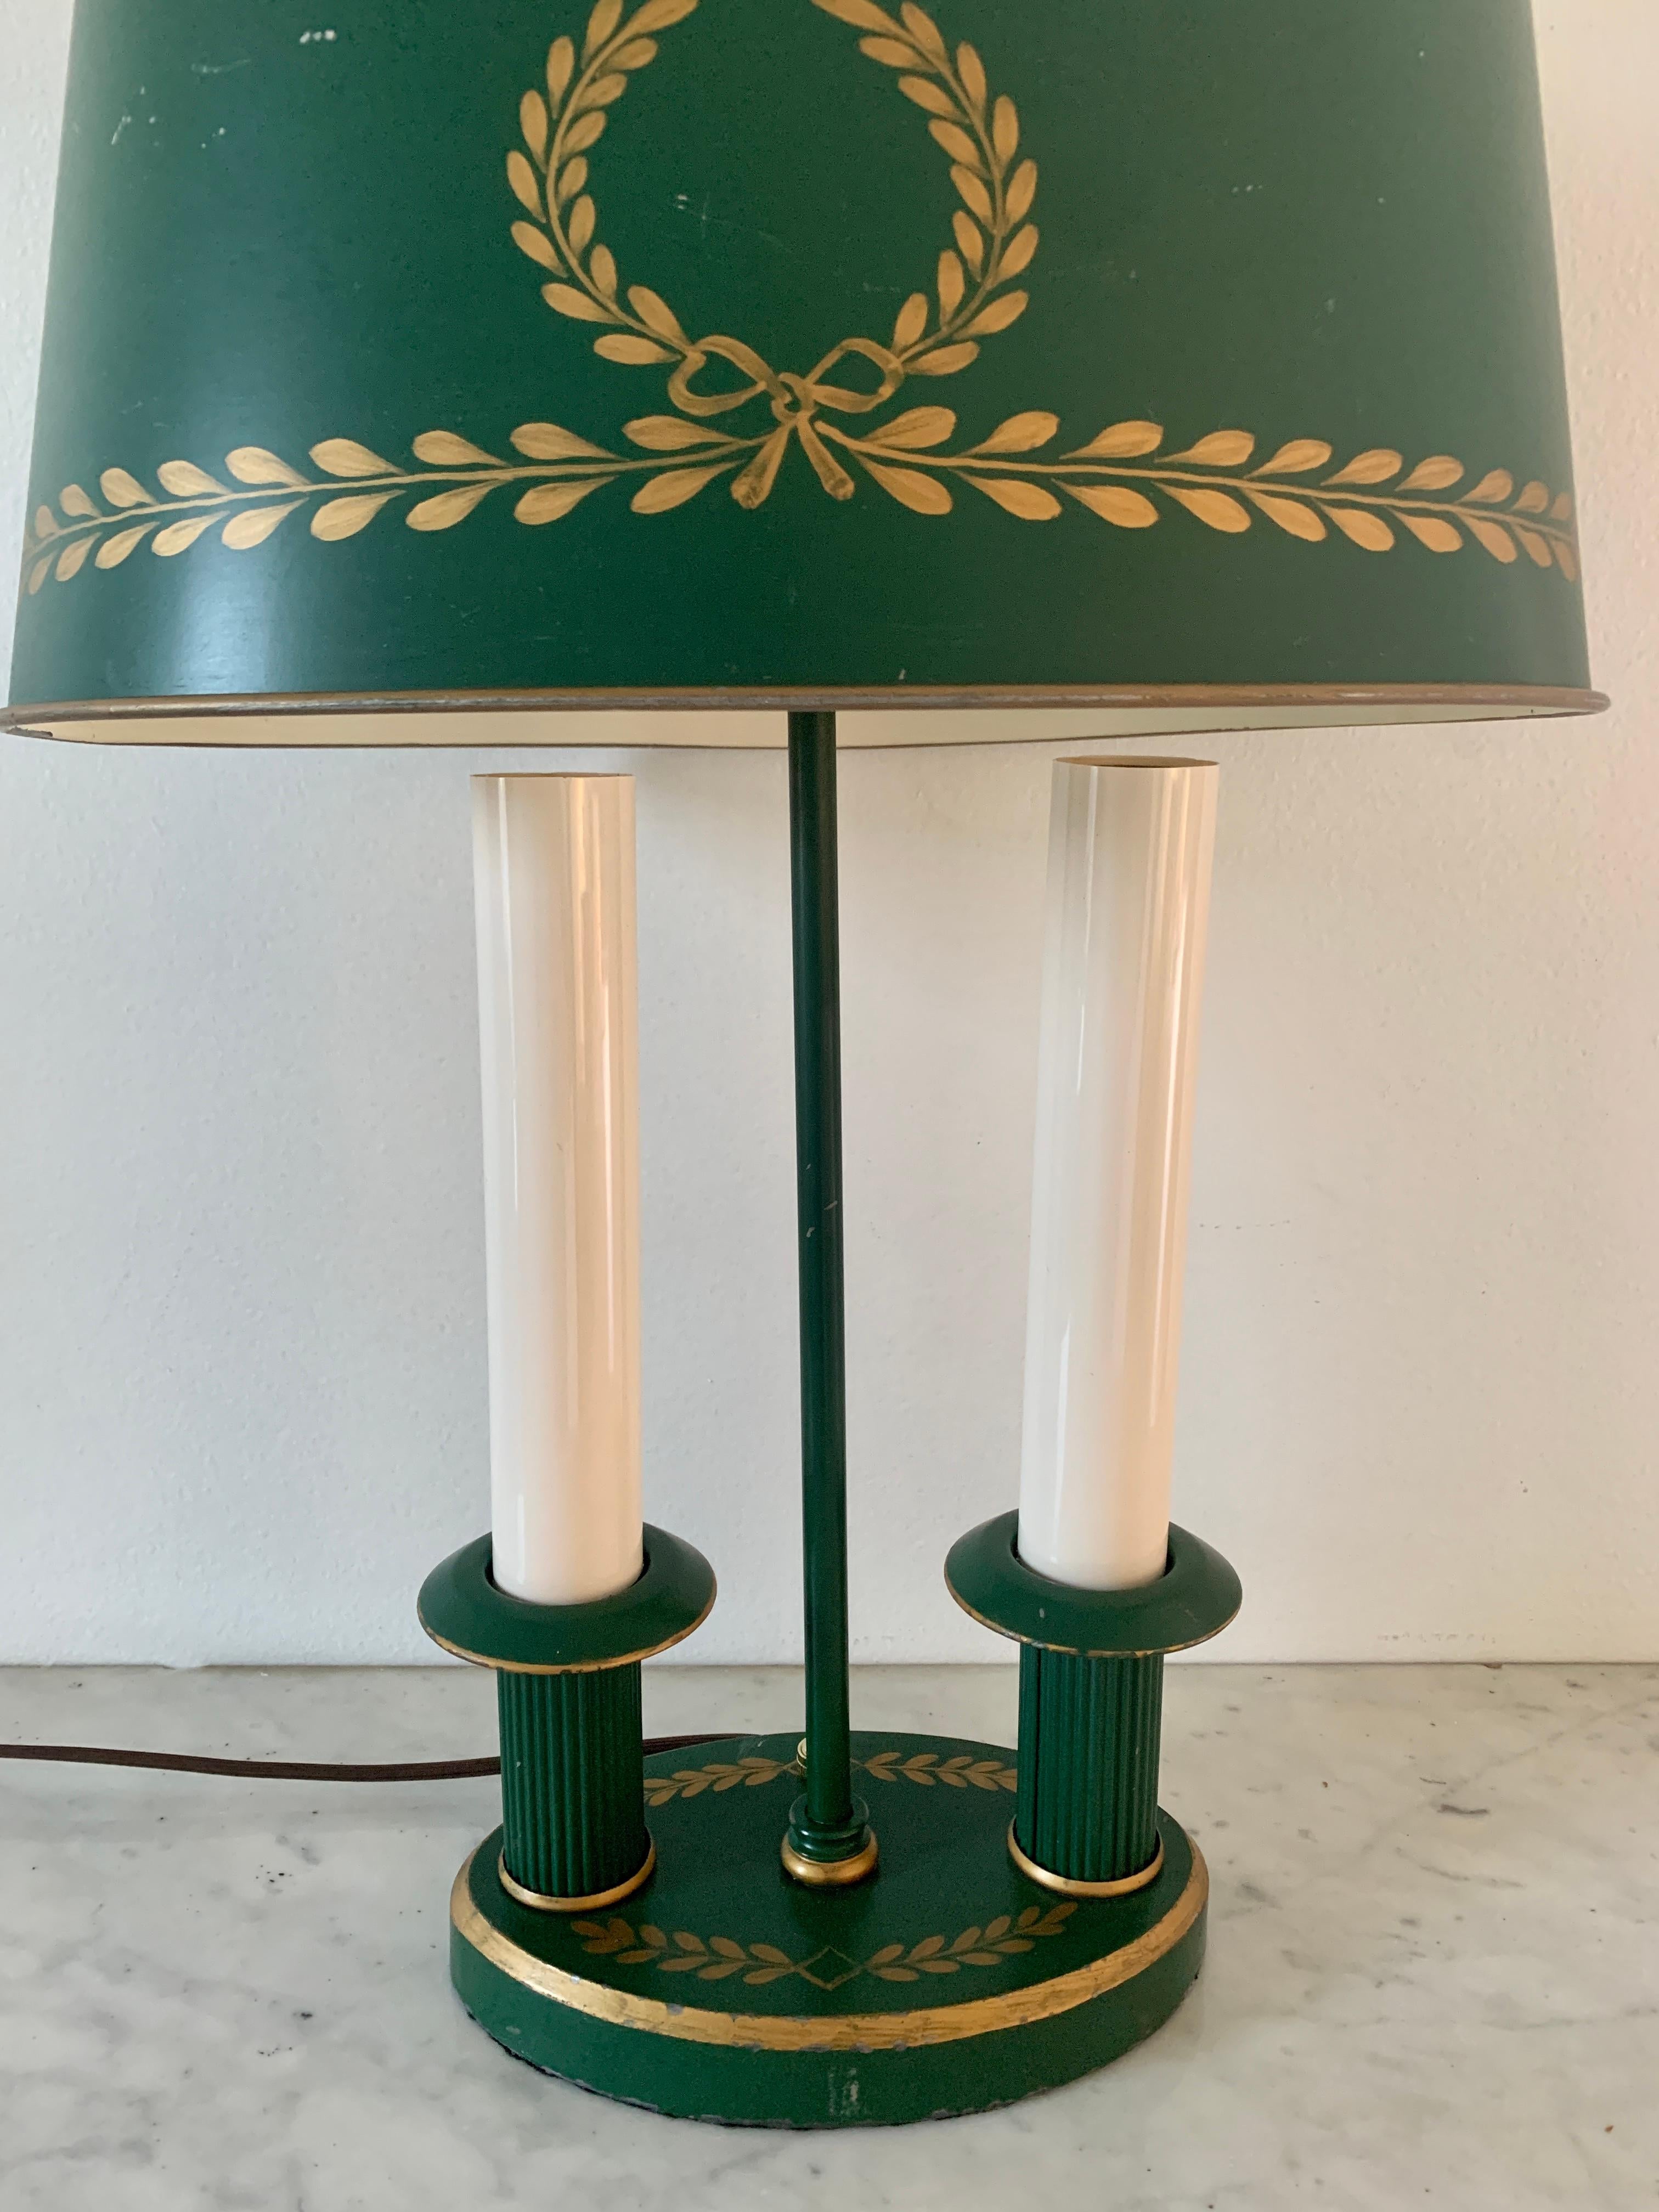 American Mid-20th Century French Regency Green and Gold Tole Bouillotte Lamp For Sale